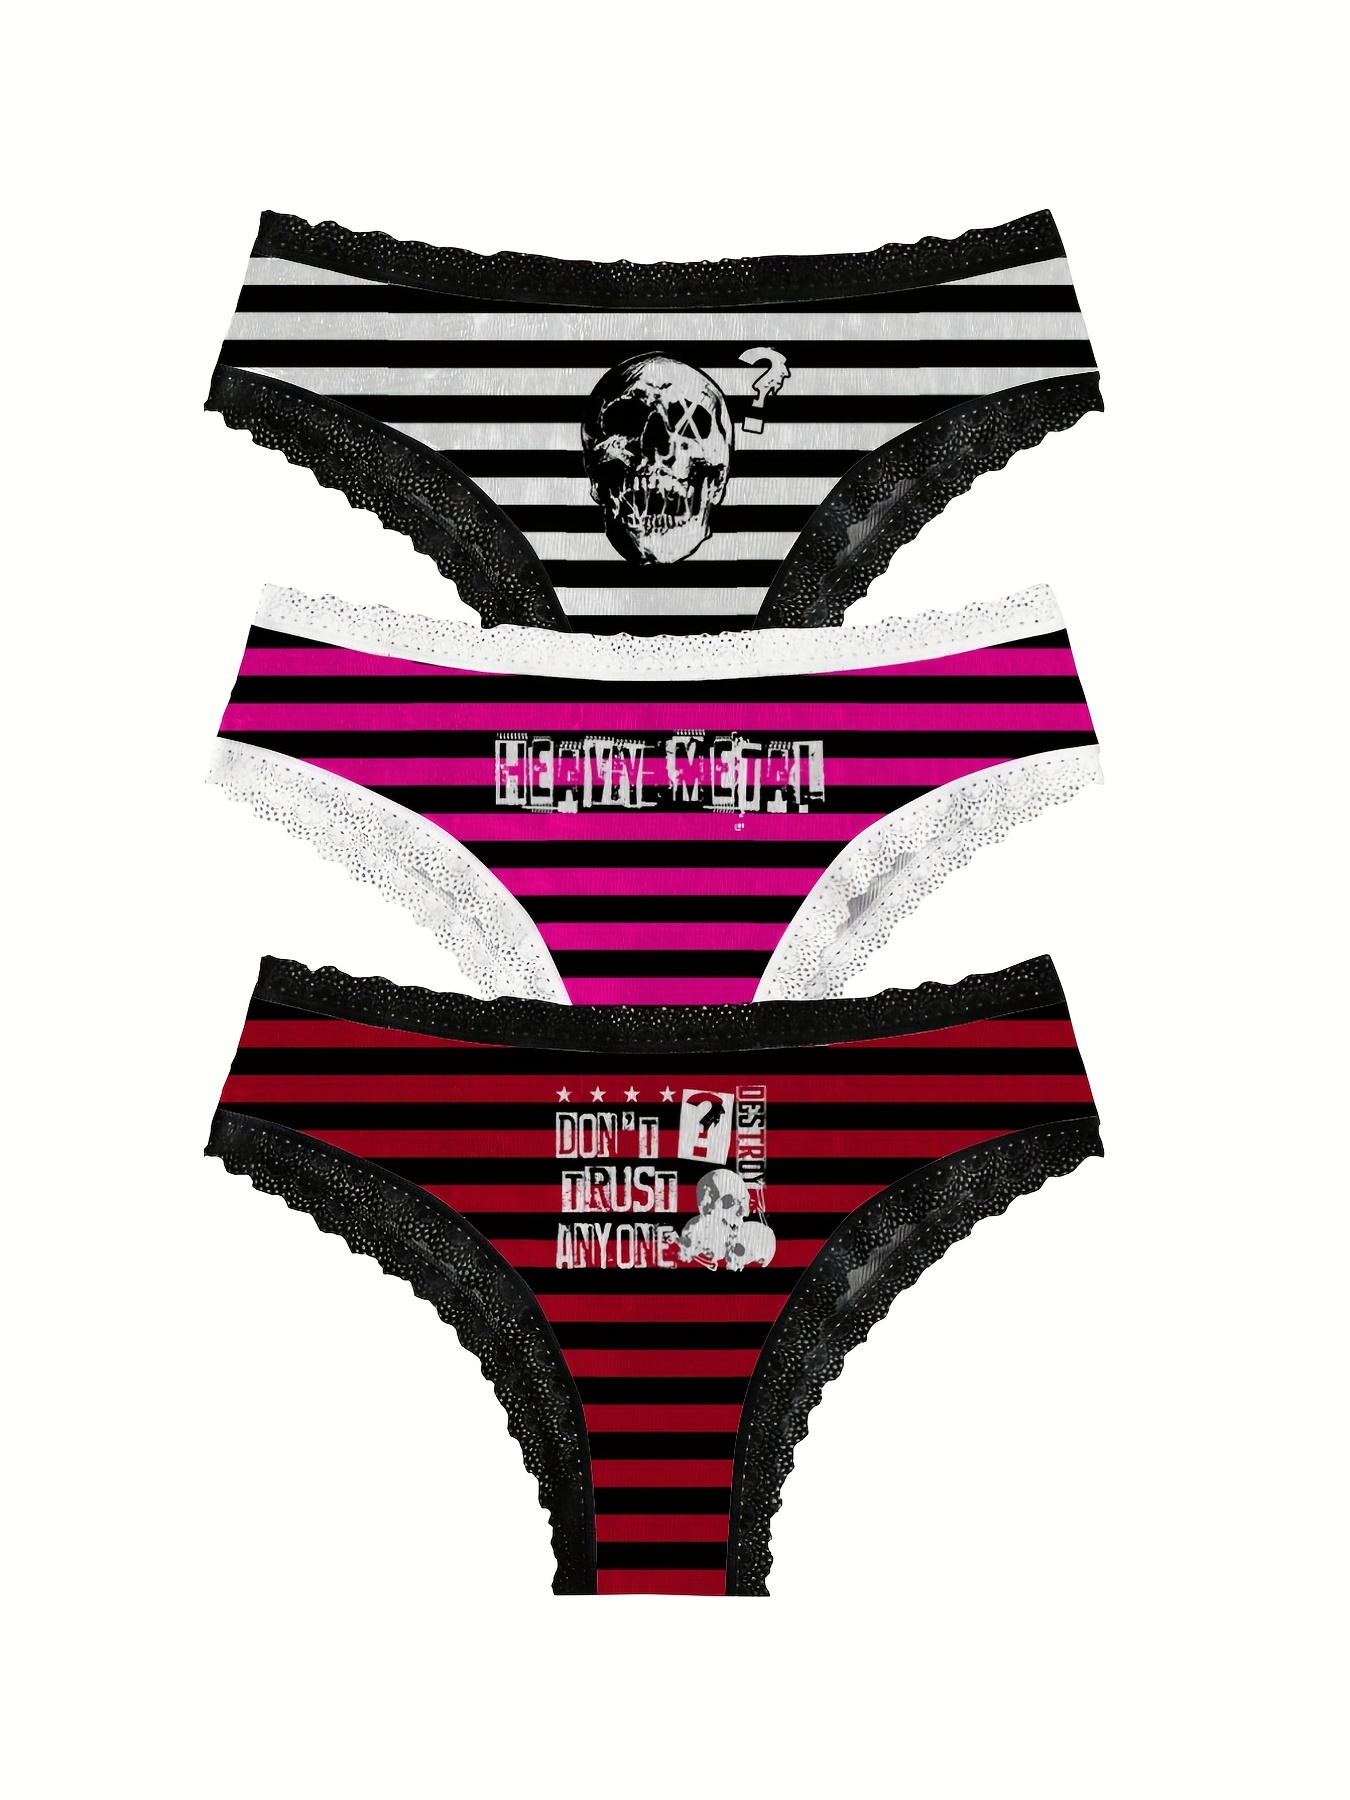 Gothicc Goth Black Underwear, Gothic Dainty & Dangerous Panties, Great  Halloween Lingerie, Multiple Sizes Available Small-2xl -  Canada